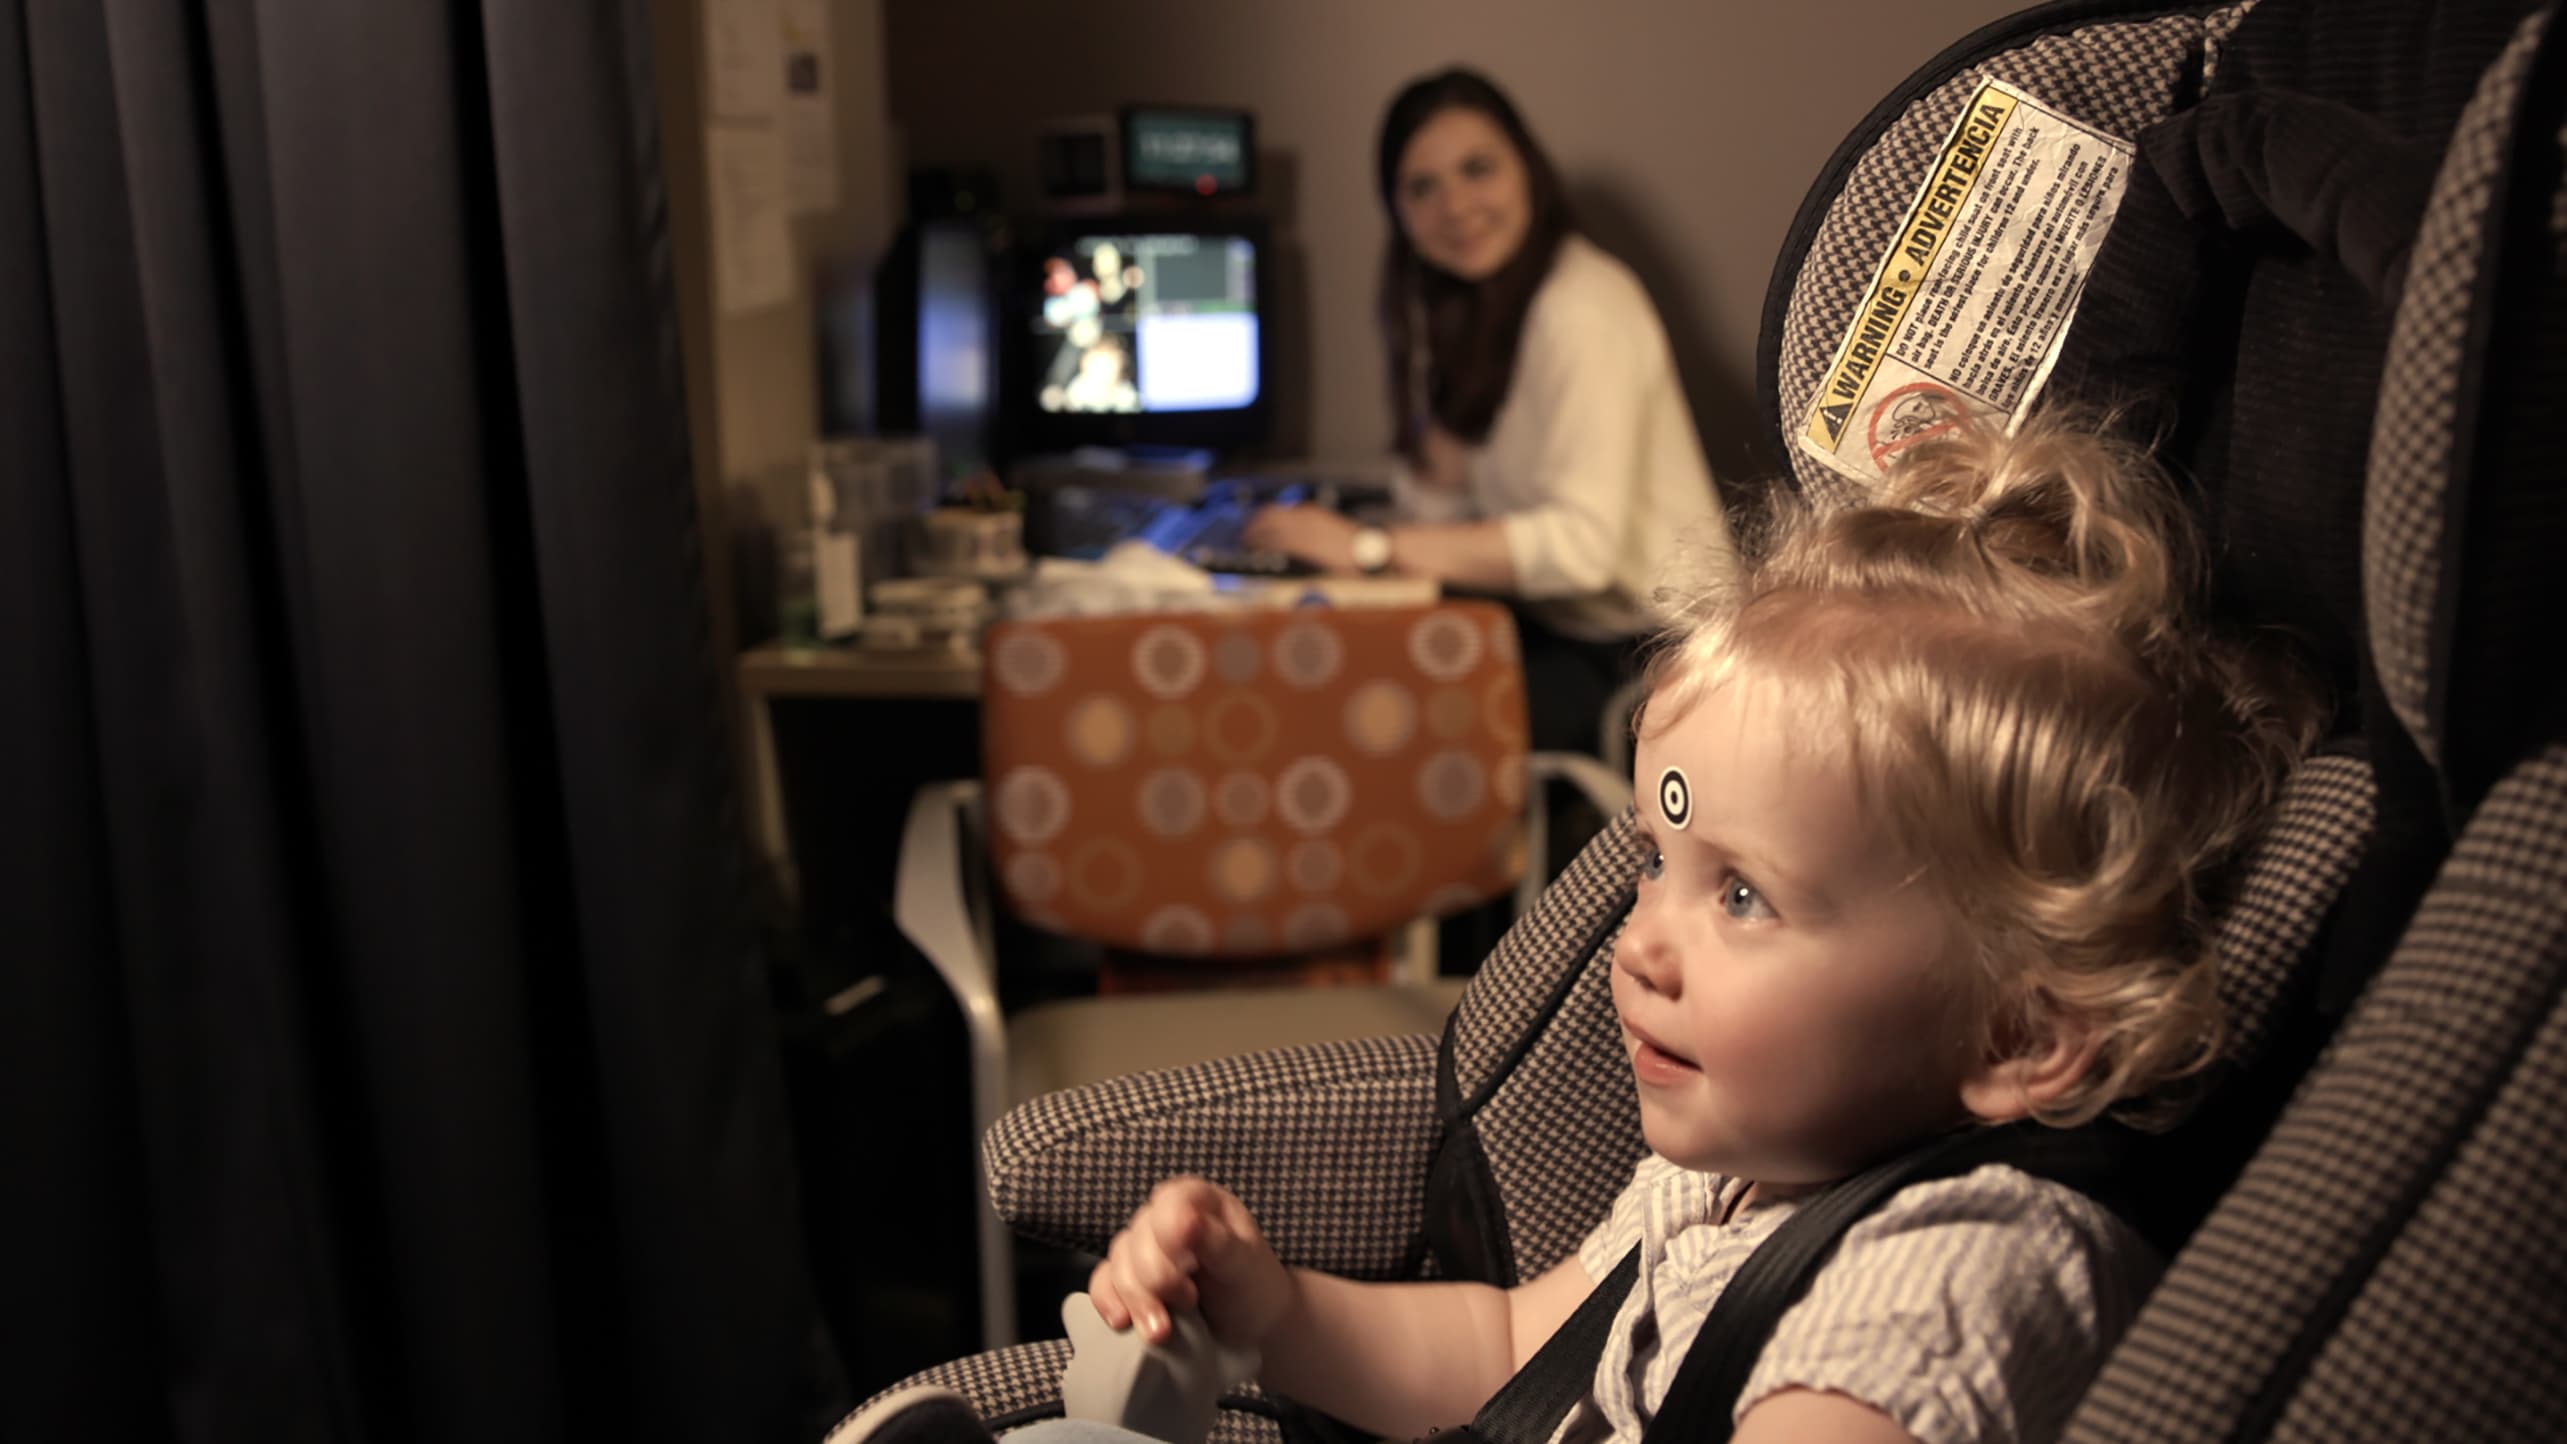 A baby undergoes eye-tracking screening for early detection of autism.